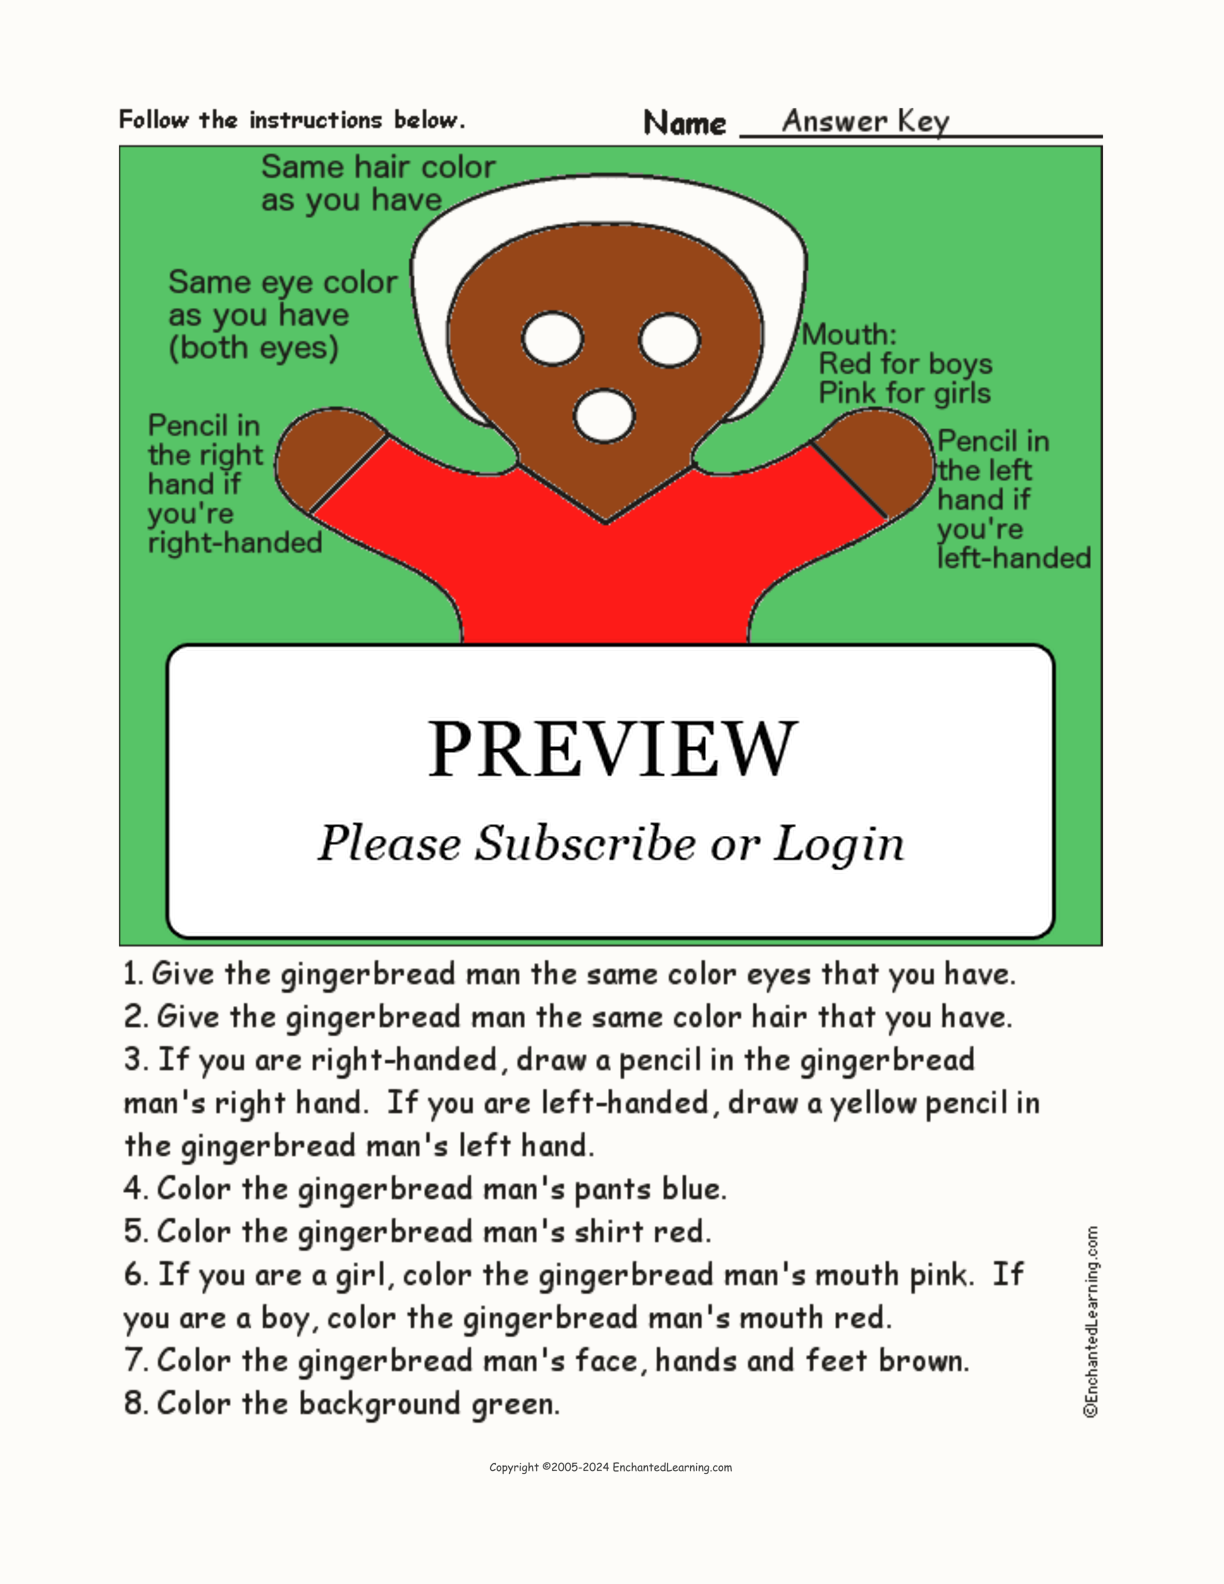 The Gingerbread Man - Follow the Instructions interactive worksheet page 2